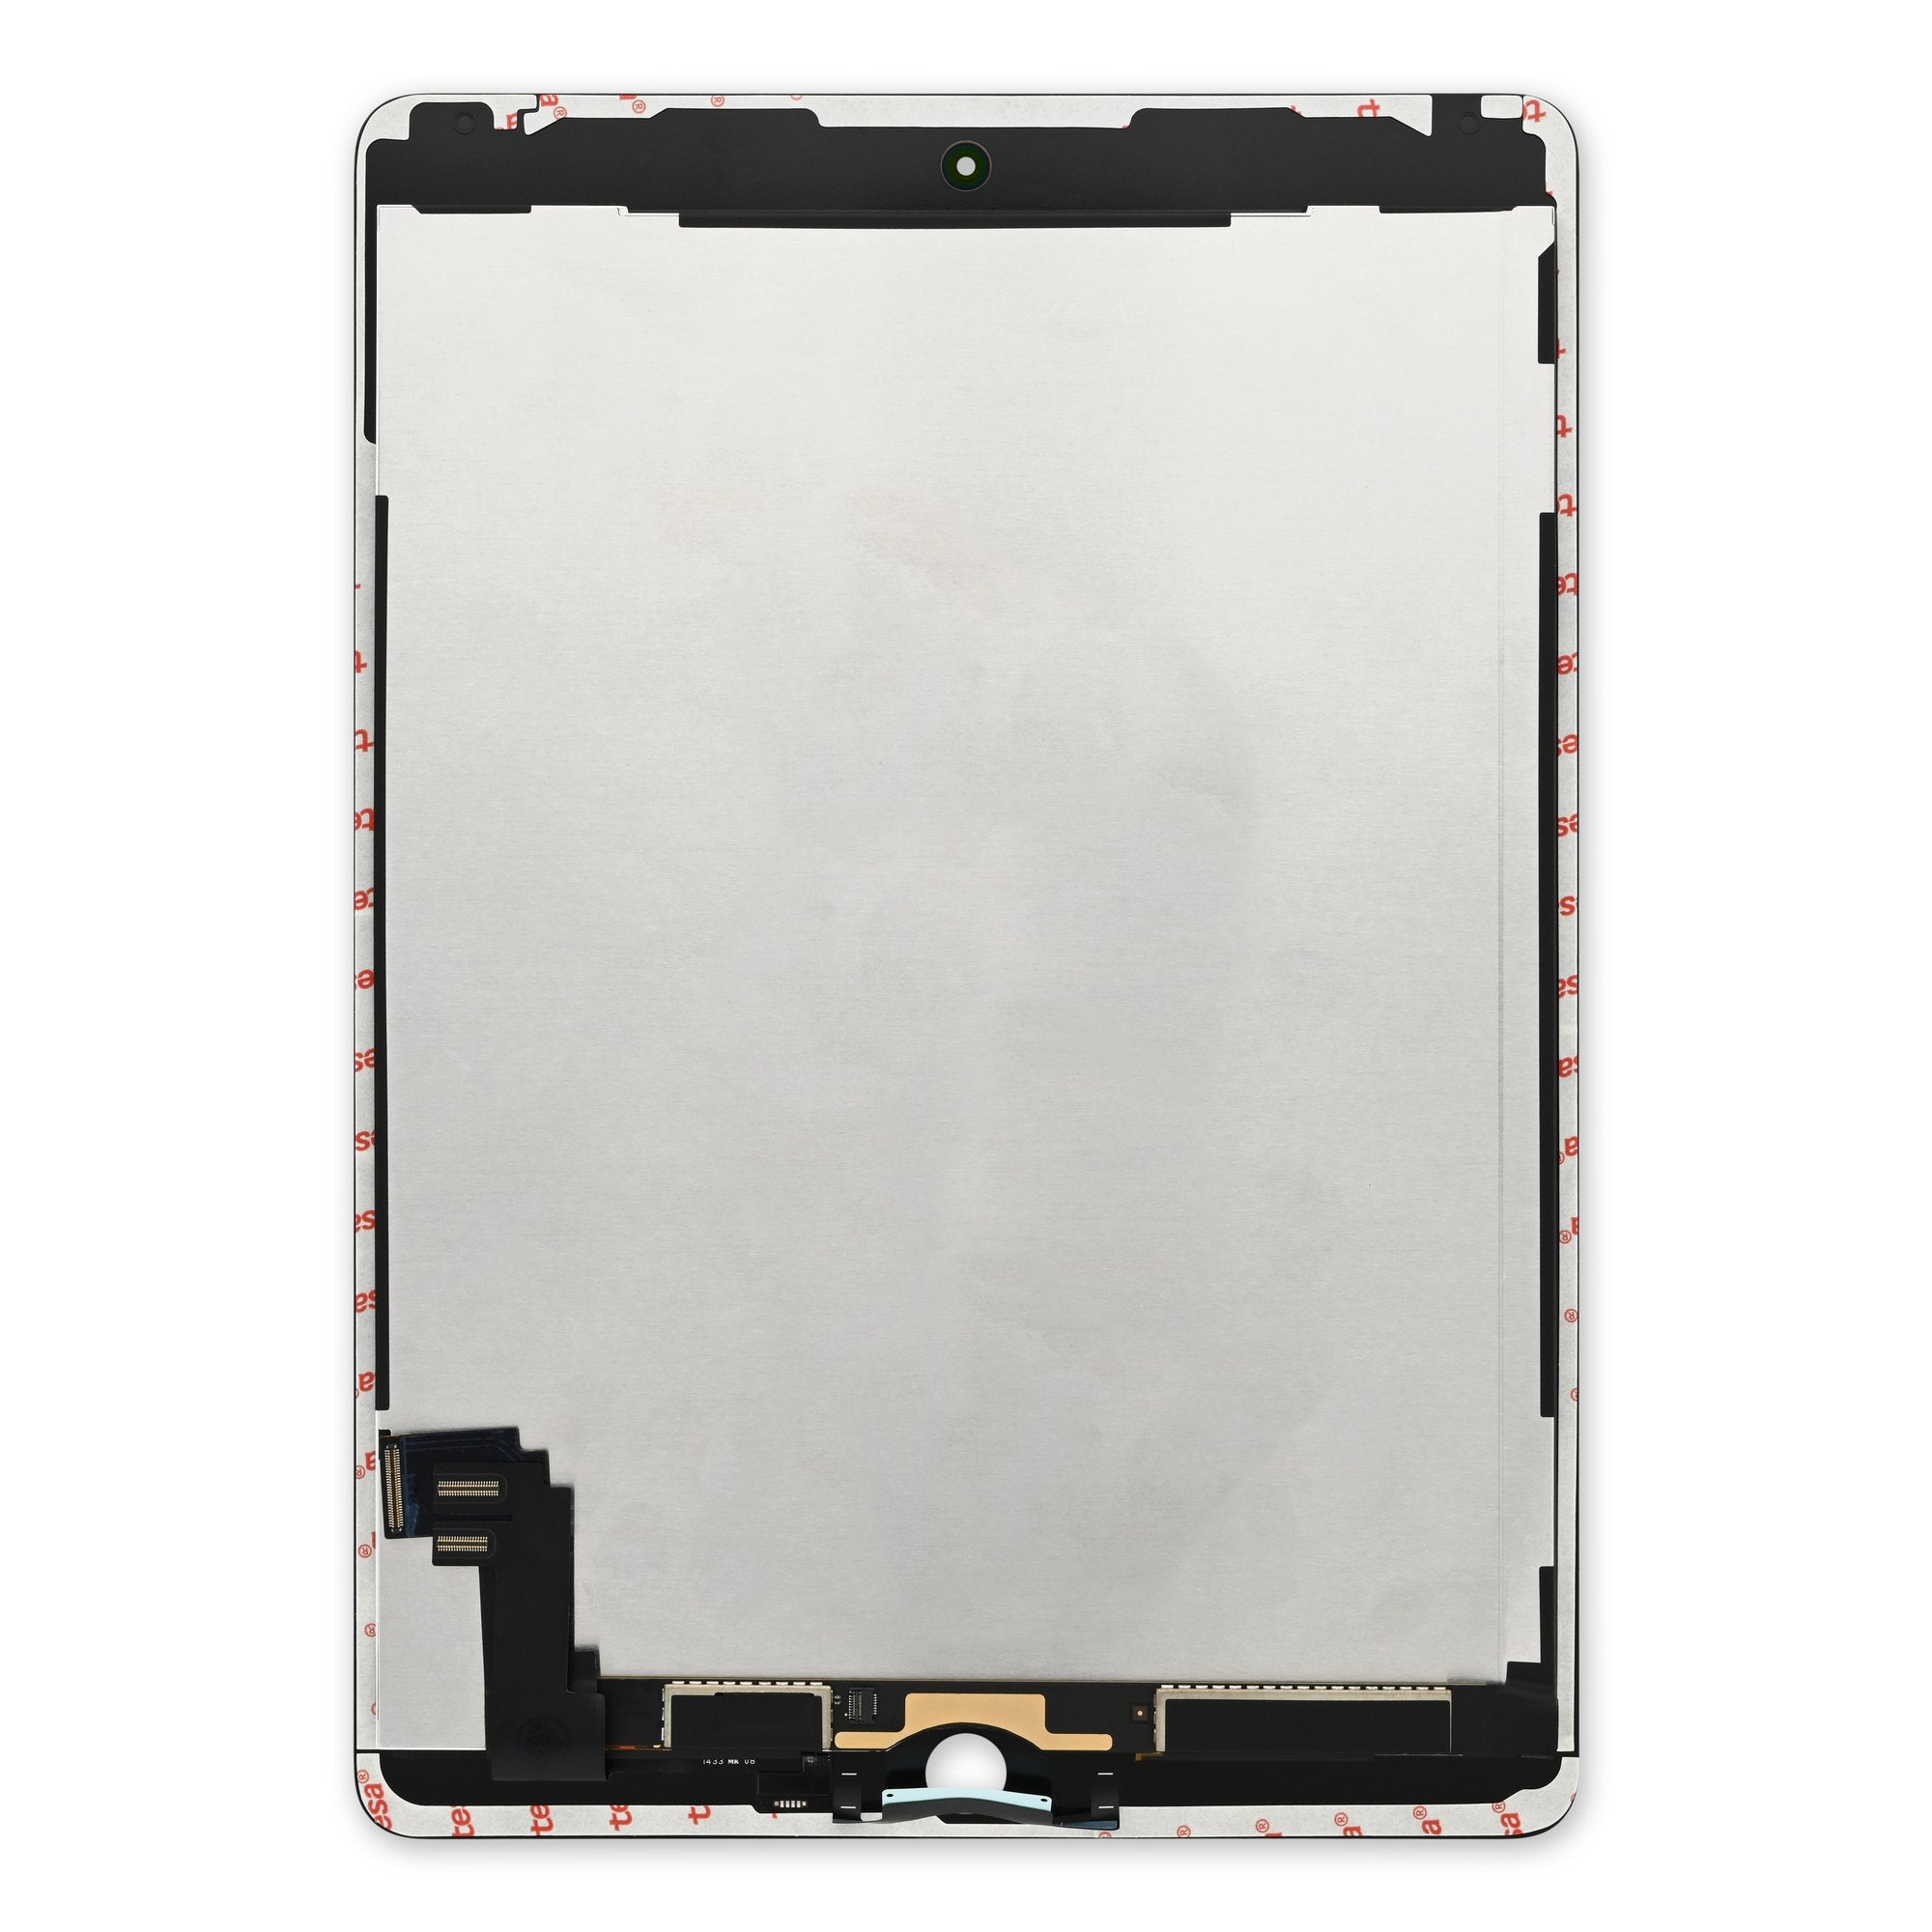 iPad Air 2 Digitizer With LCD Screen (2014) A1566 A1567